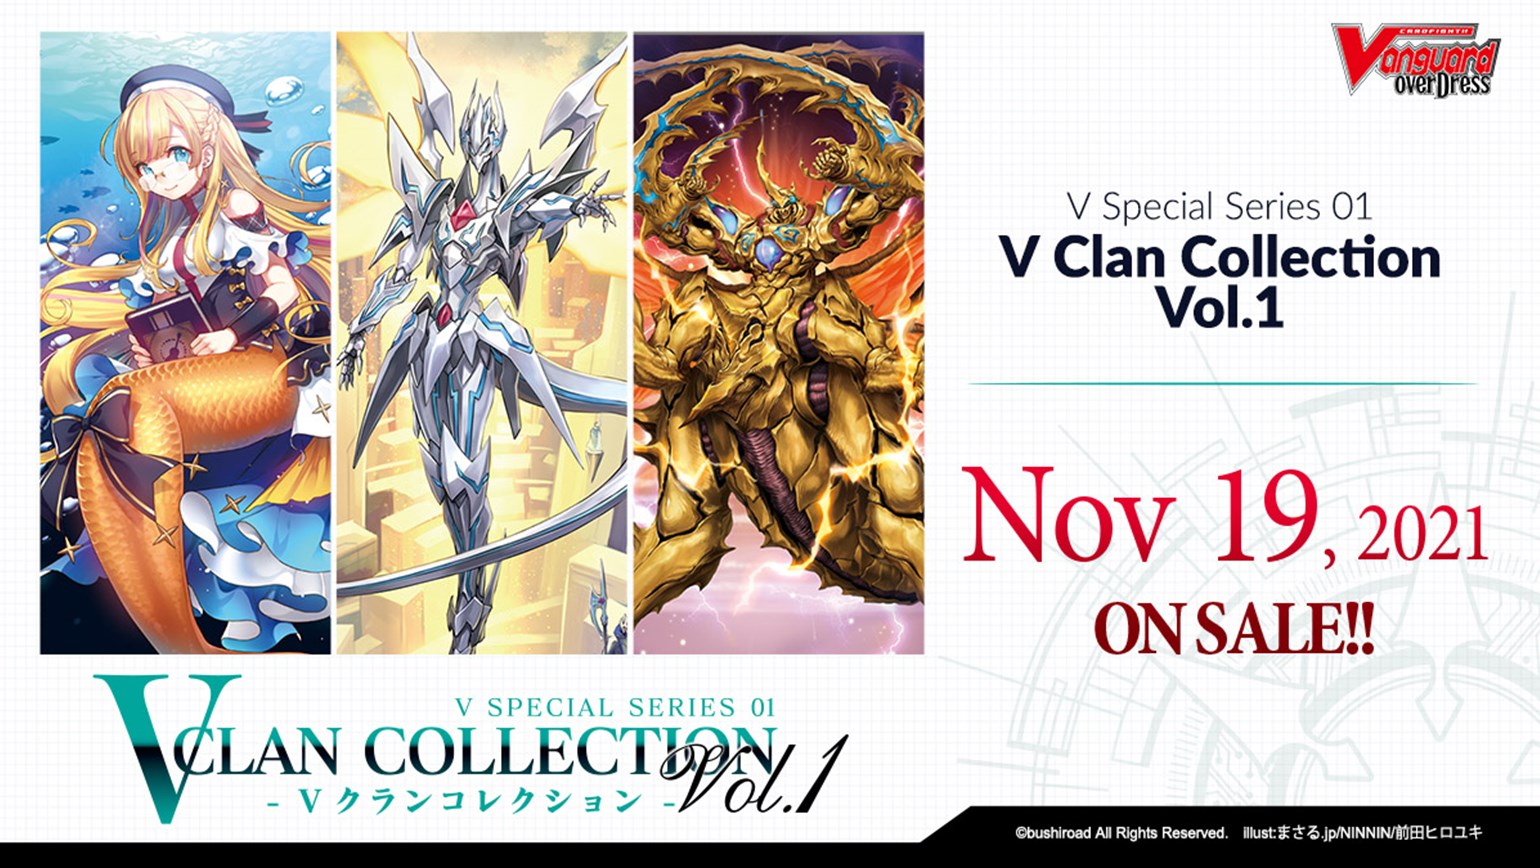 New English Edition overDress V Special Series 01: V Clan Collection Vol.1, Coming to Stores on November 19th!